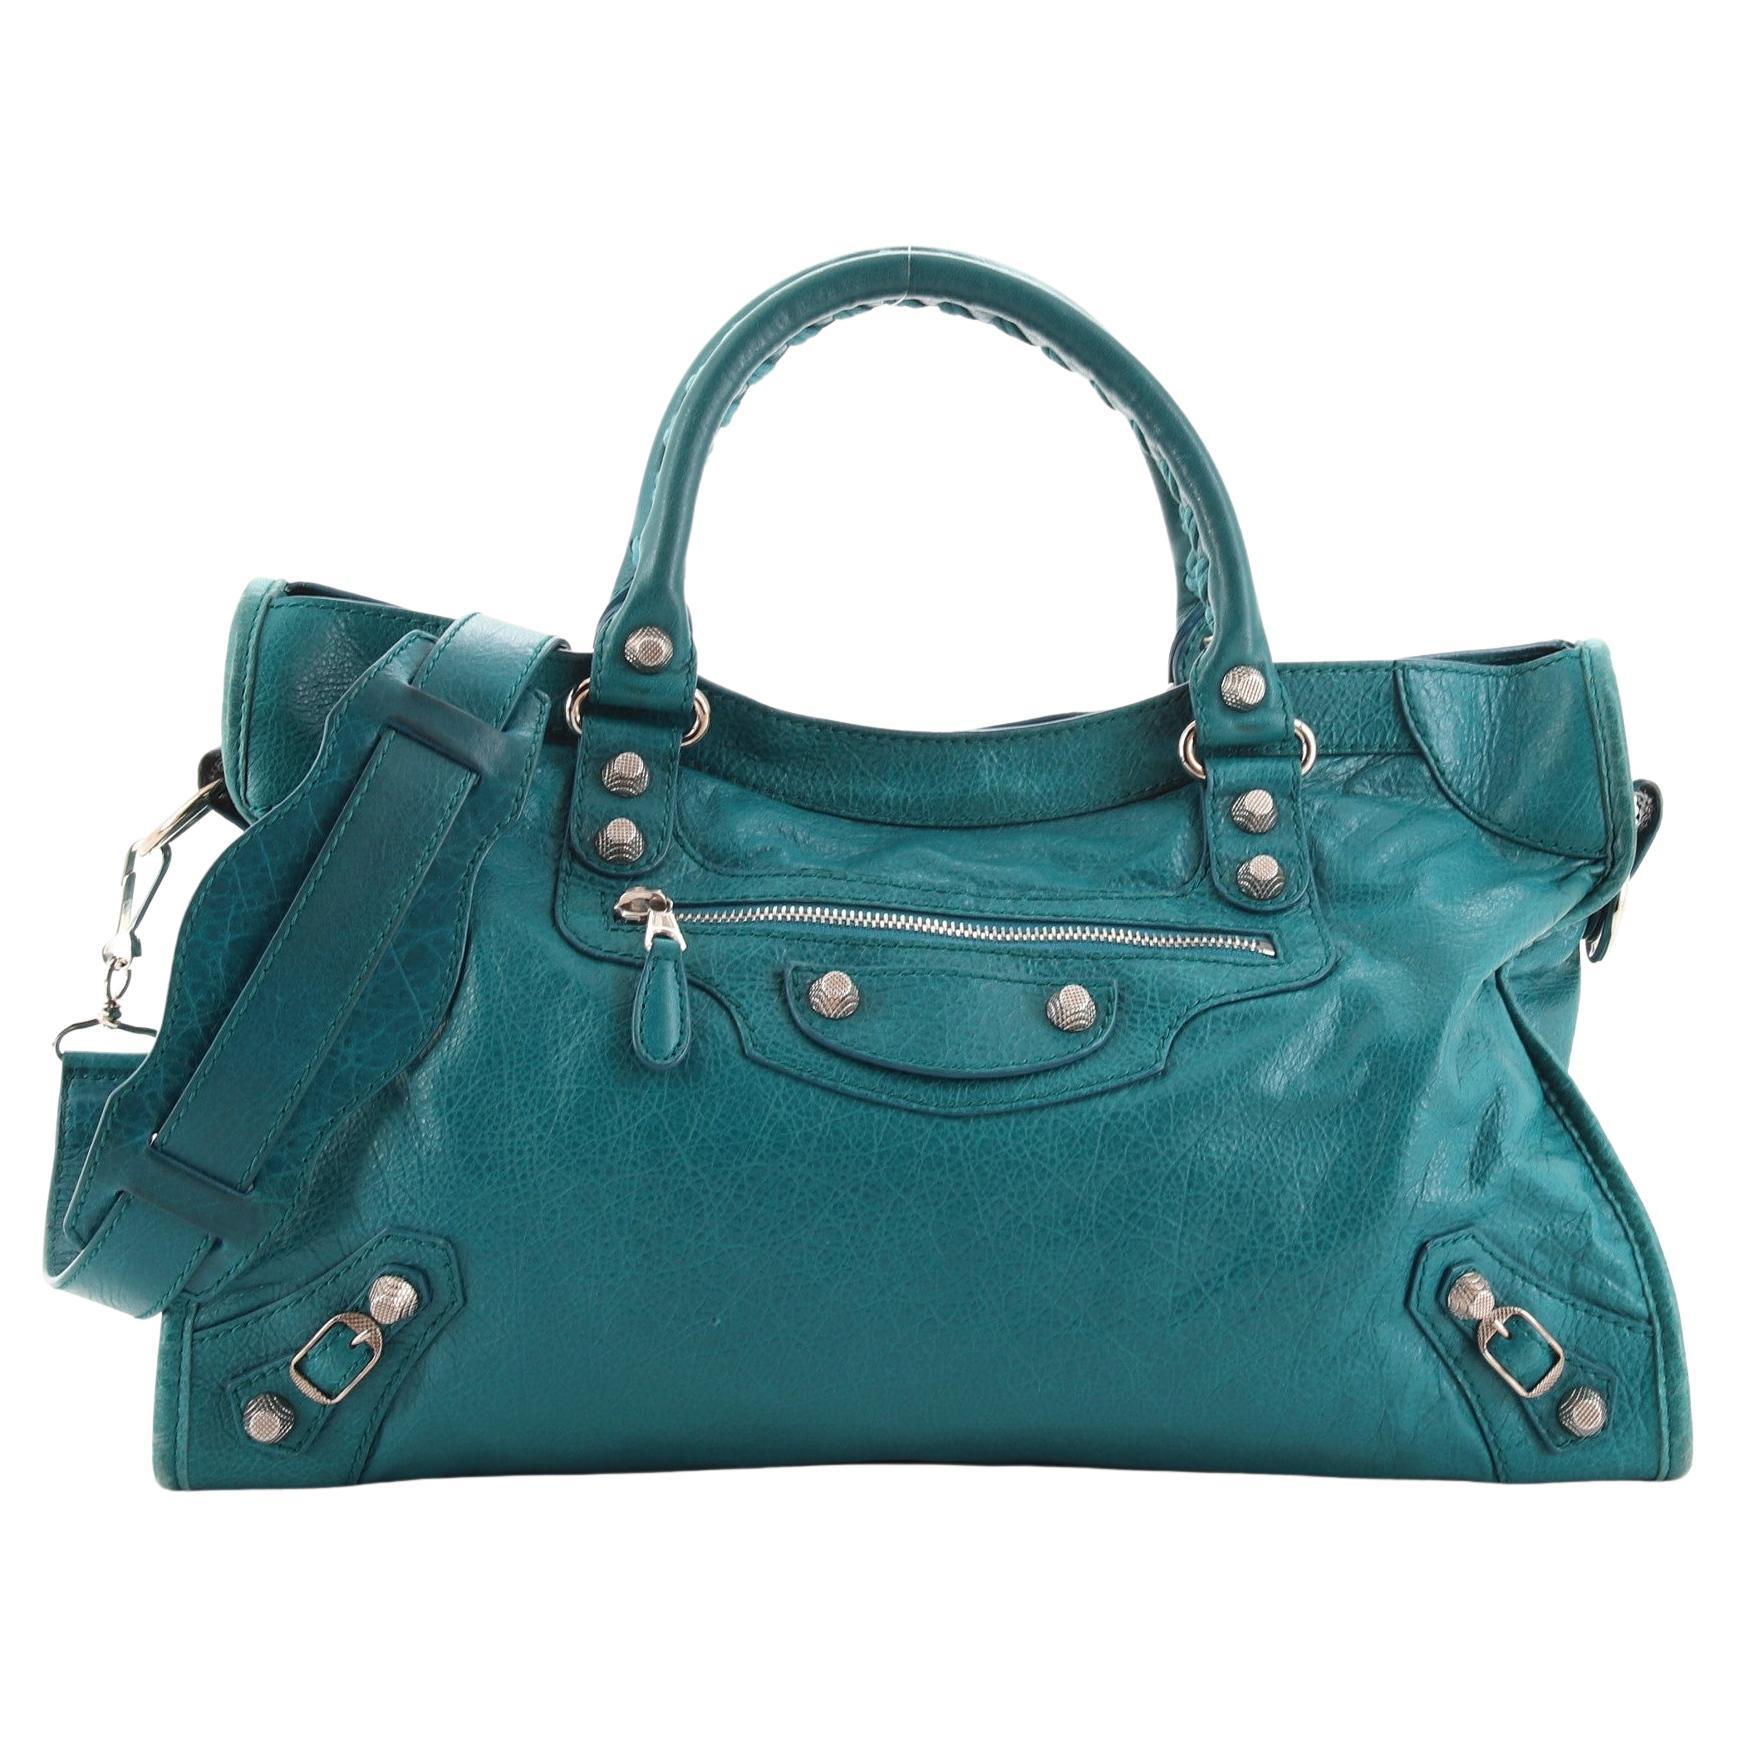 Balenciaga City inspired bag in genuine italian leather NO BRAND  Bags  Buy bags online Leather